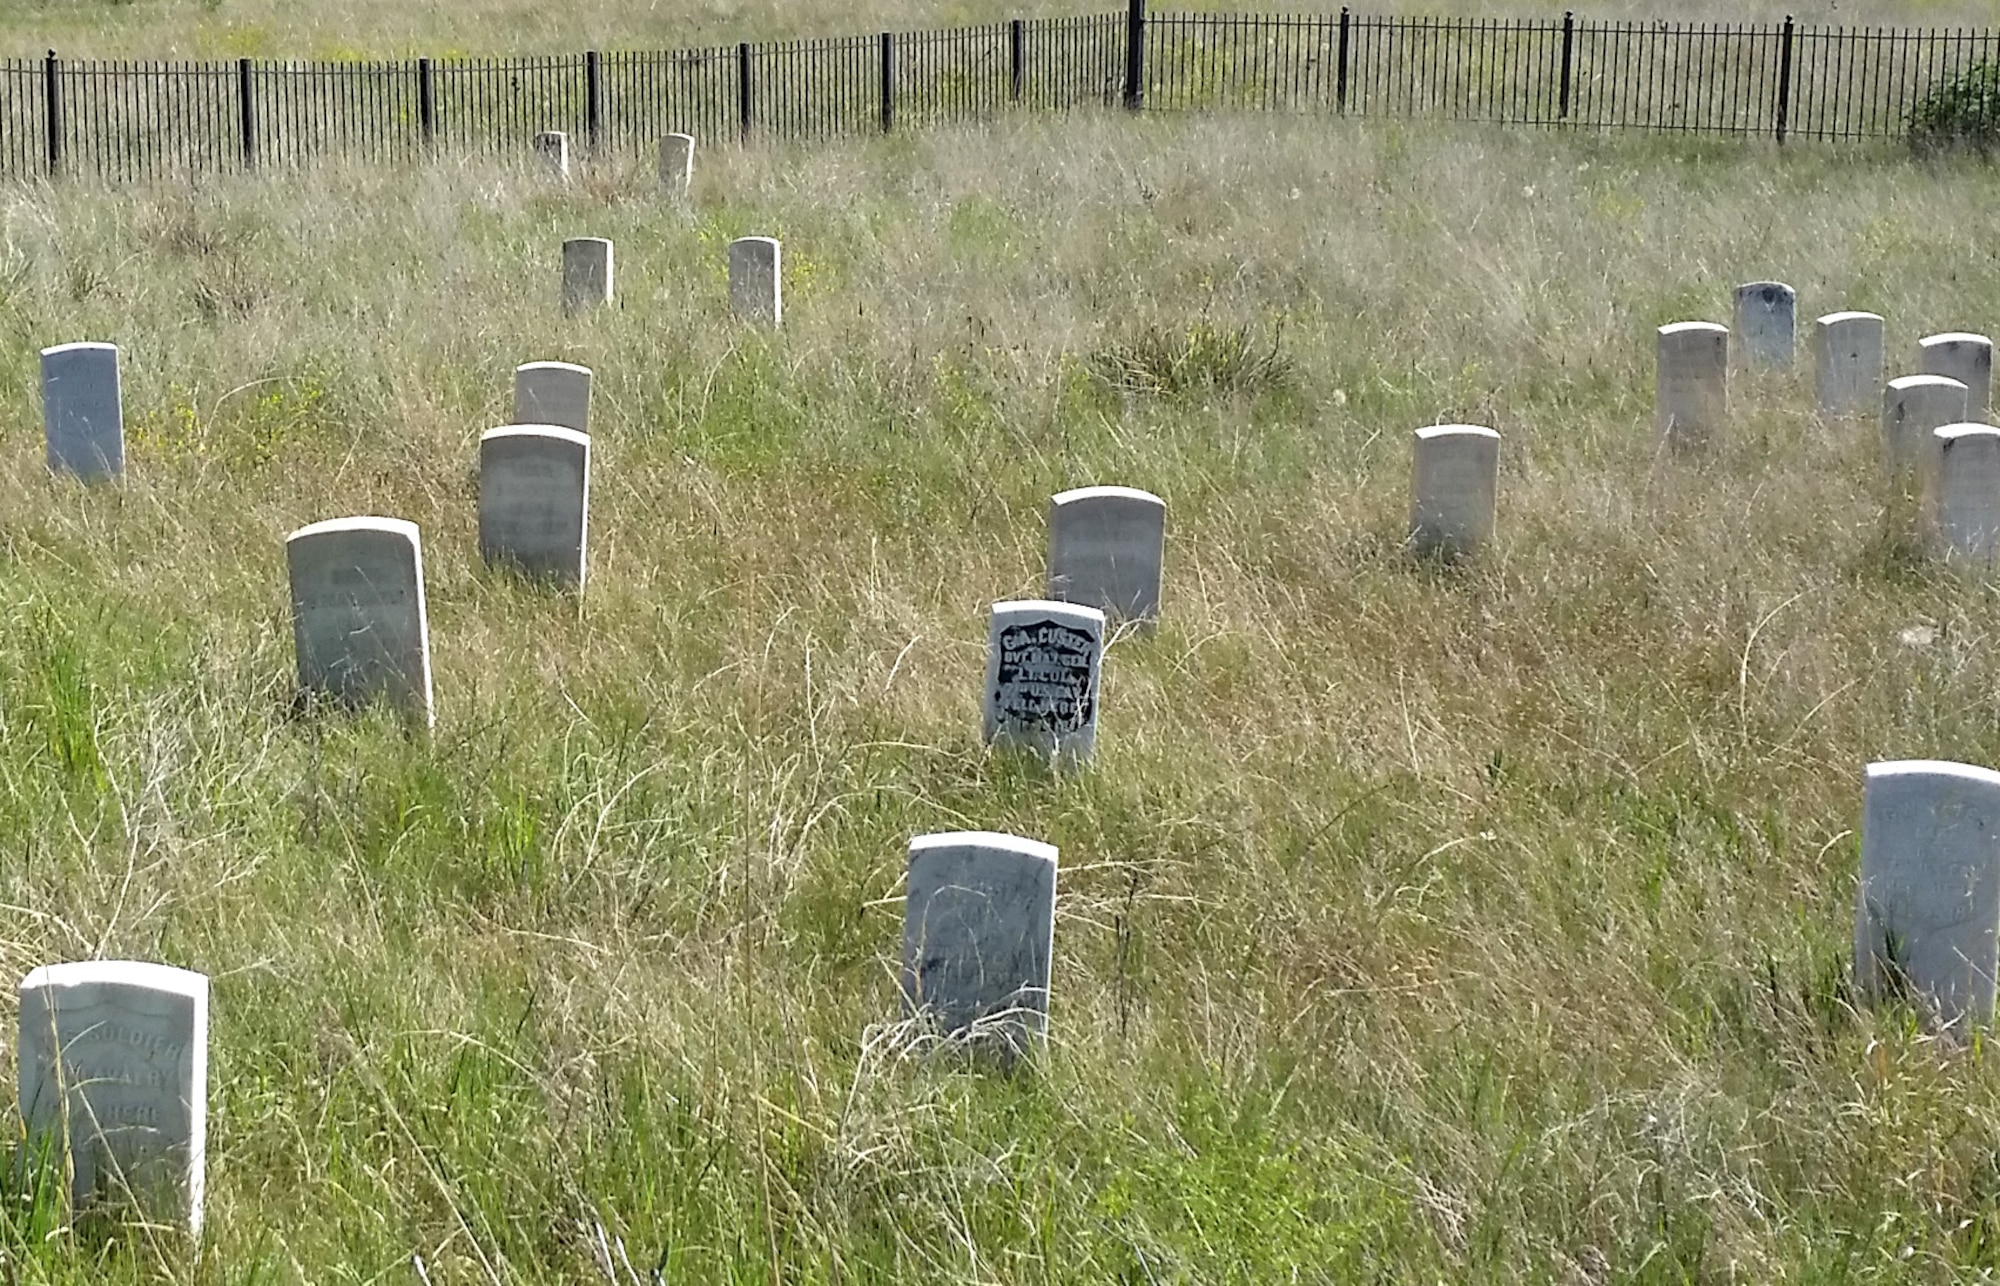 A special black-plated marker, center, on Last Stand Hill indicates where Lt. Col. George A. Custer, commander of the Seventh Cavalry regiment, died June 25, 1876, at the Battle of Little Bighorn near present-day Garryowen, Mont.  In 1890, the Army erected 249 white marble headstones across the battlefield to show where each of Custer’s men had fallen during the battle. In 1999 the National Park Service began placing red granite markers at known Cheyenne and Lakota casualty sites to help give a balanced interpretation of the conflict. (U.S. Air Force photo/John Turner)